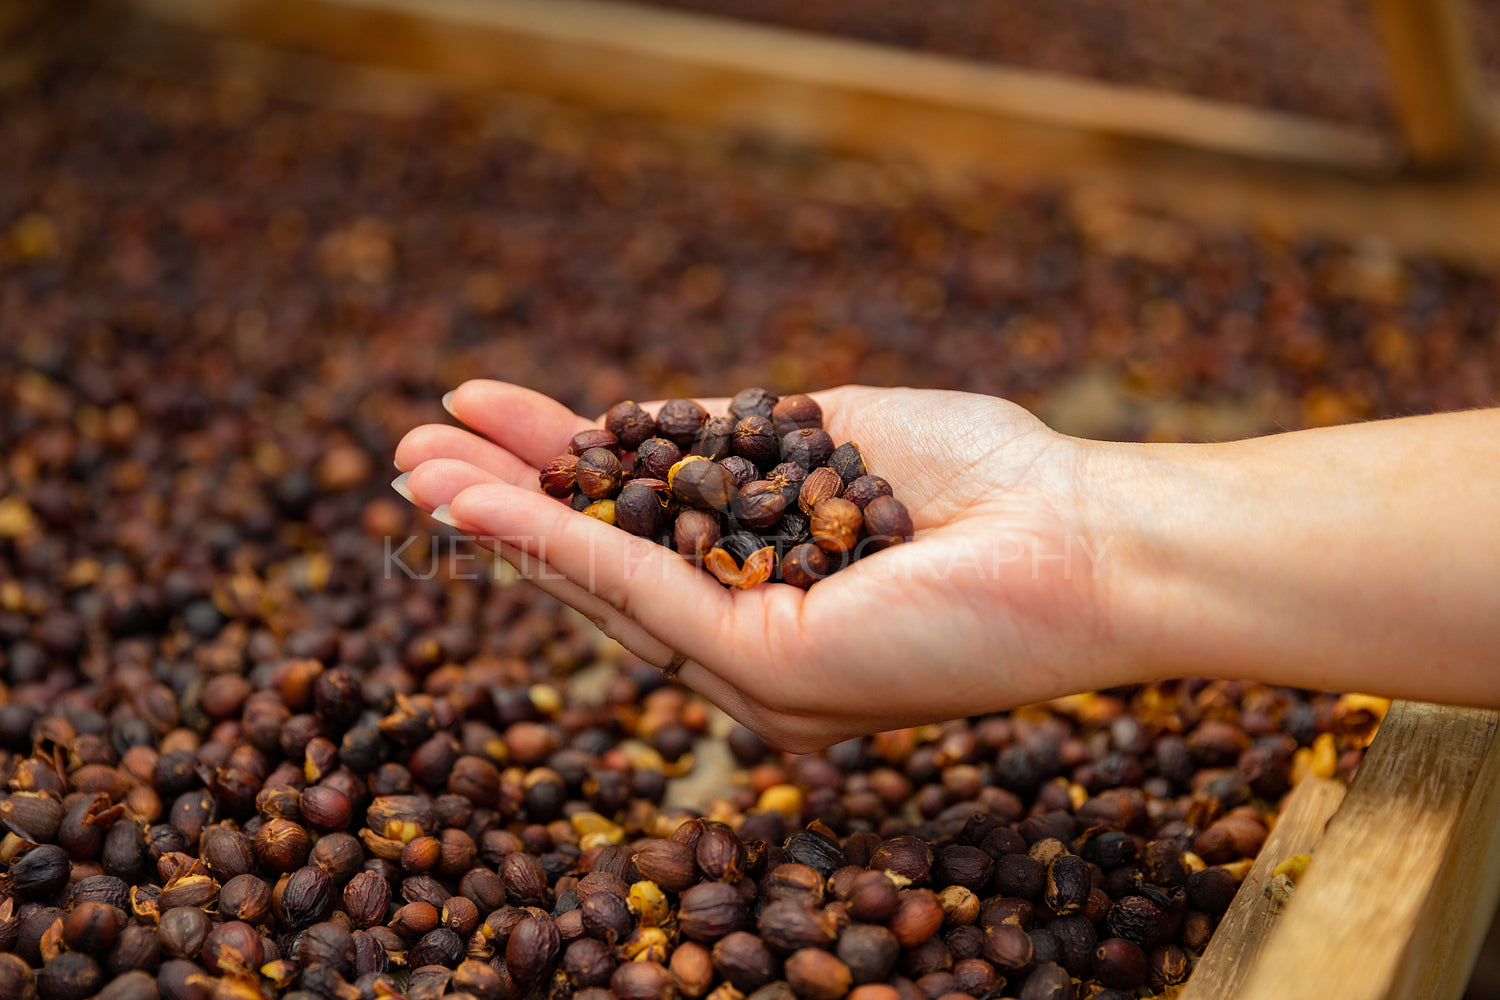 Female Employee Holding Organic Raw Coffee Beans in Her Hand